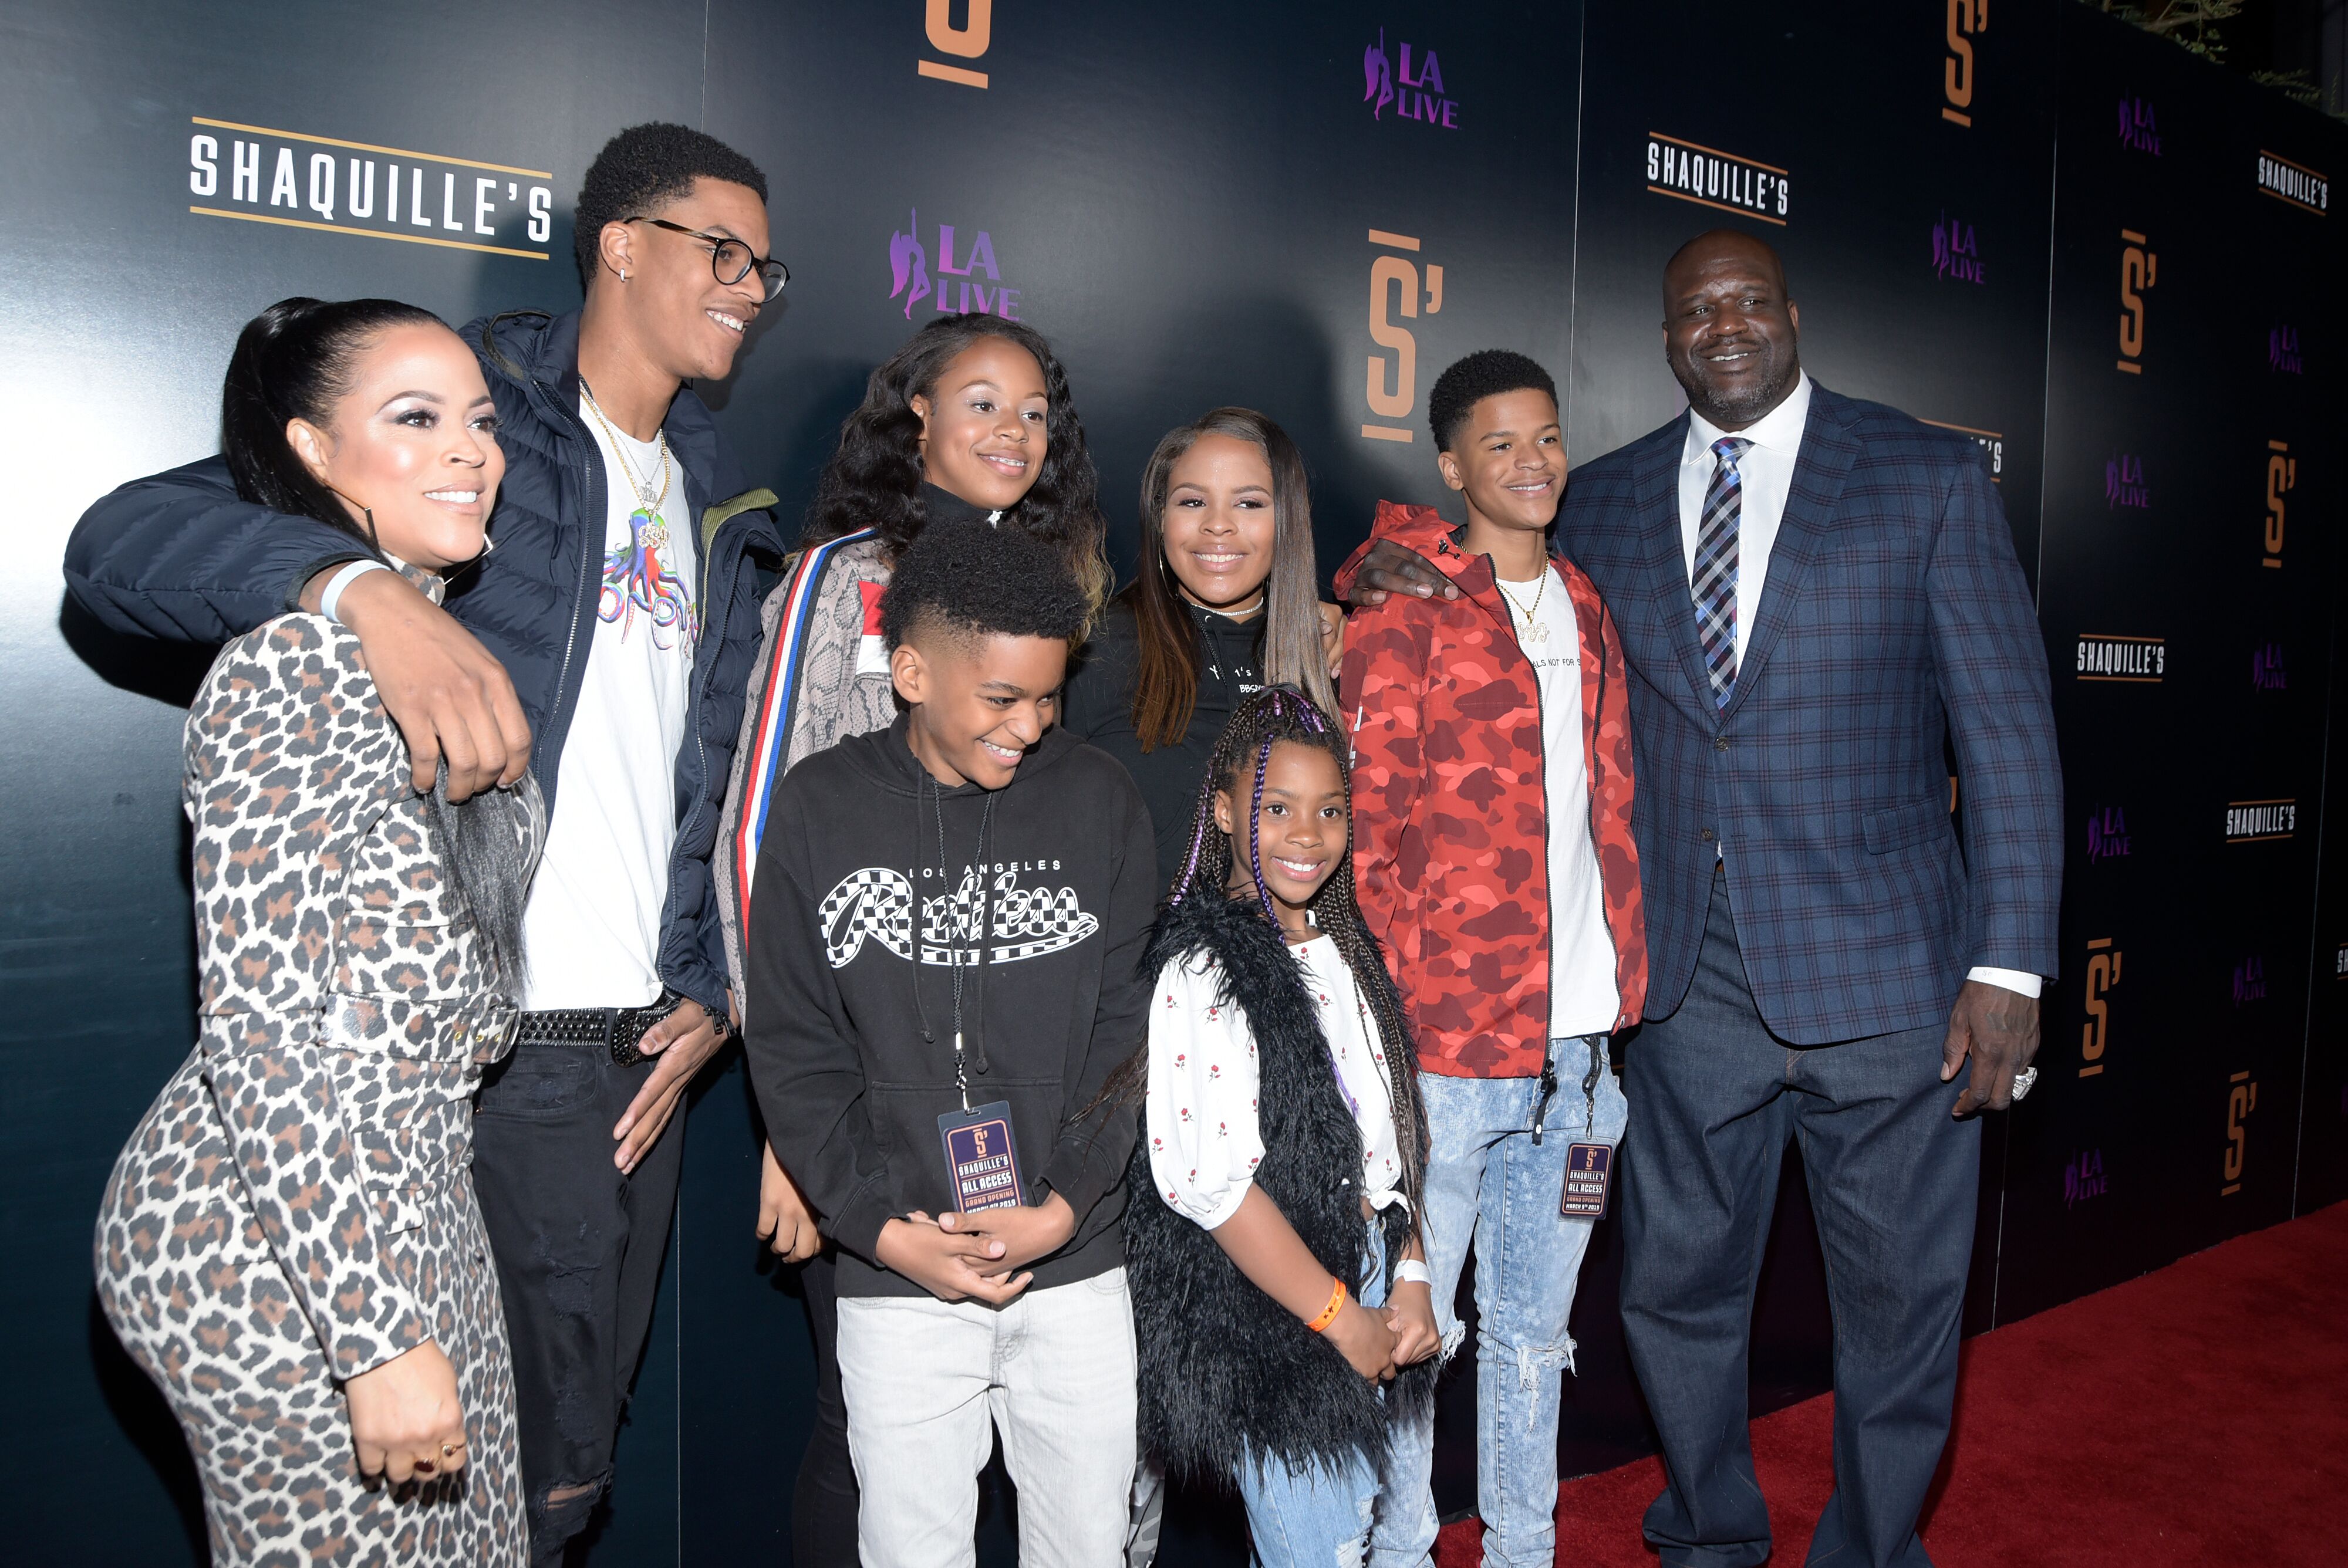 Shaquille and Shaunie O'Neal with their children at an event for their restaurant, Shaquille's | Source: Getty Images/GlobalImagesUkraine